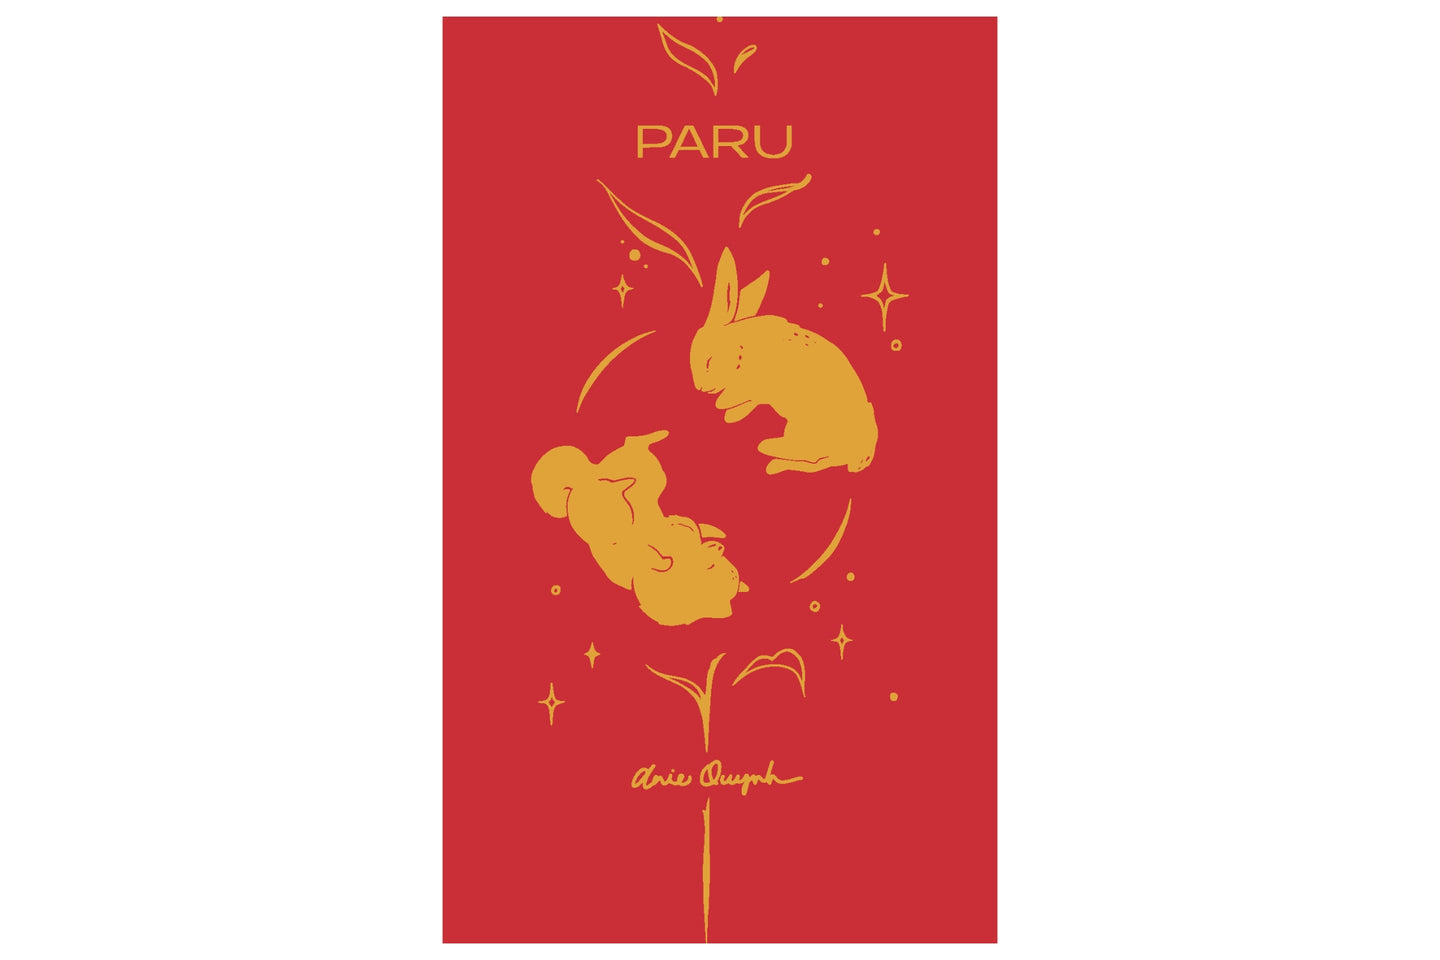 Lunar New Year Lì Xì (Red Envelope) by Anie Quynh, 2023 Year of the Rabbit